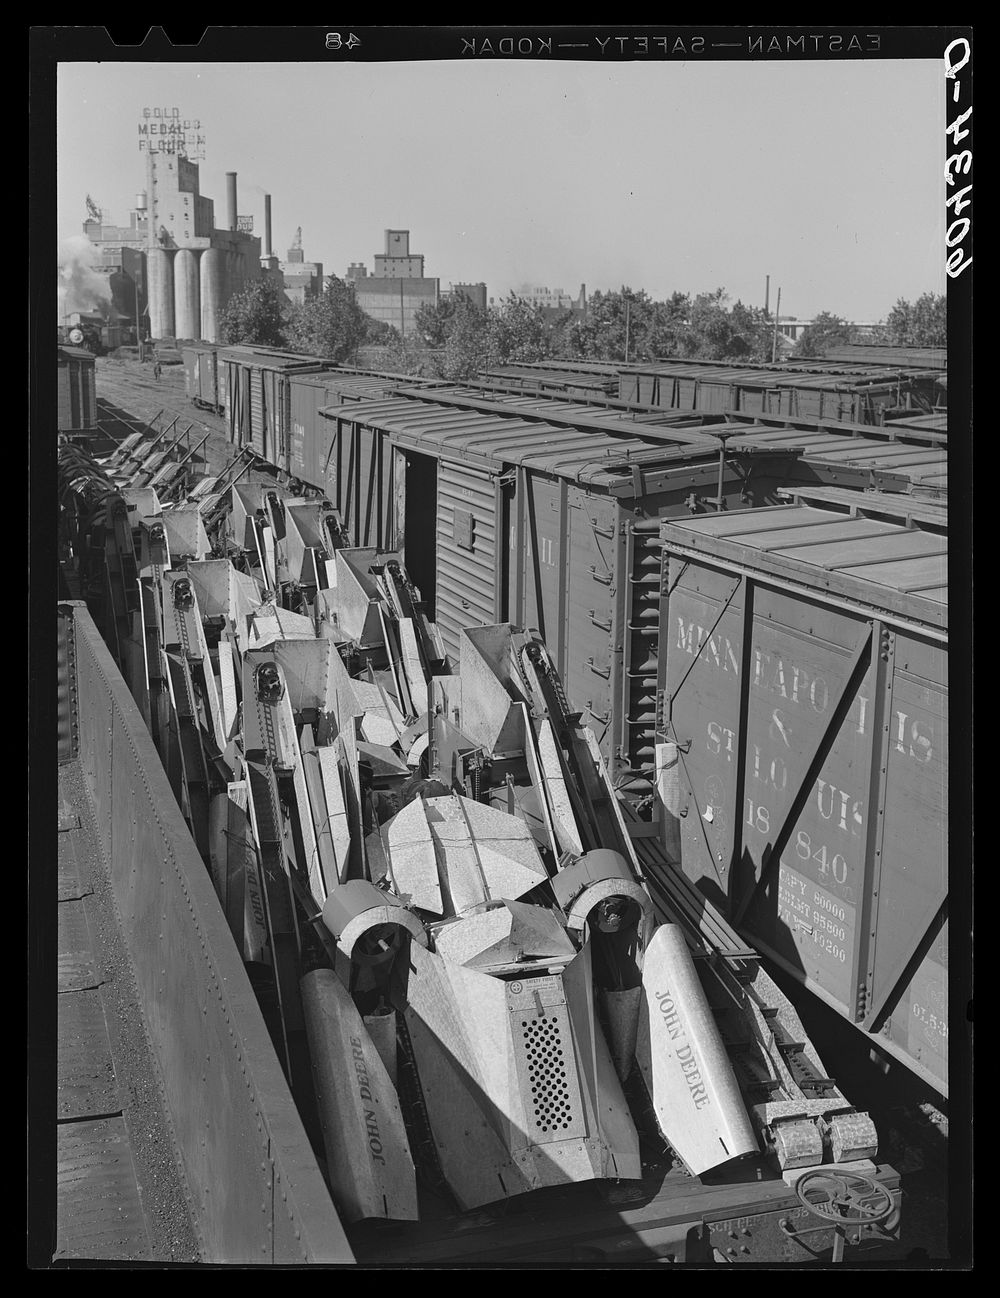 Corn shuckers loaded on freight cars. Minneapolis, Minnesota. Sourced from the Library of Congress.